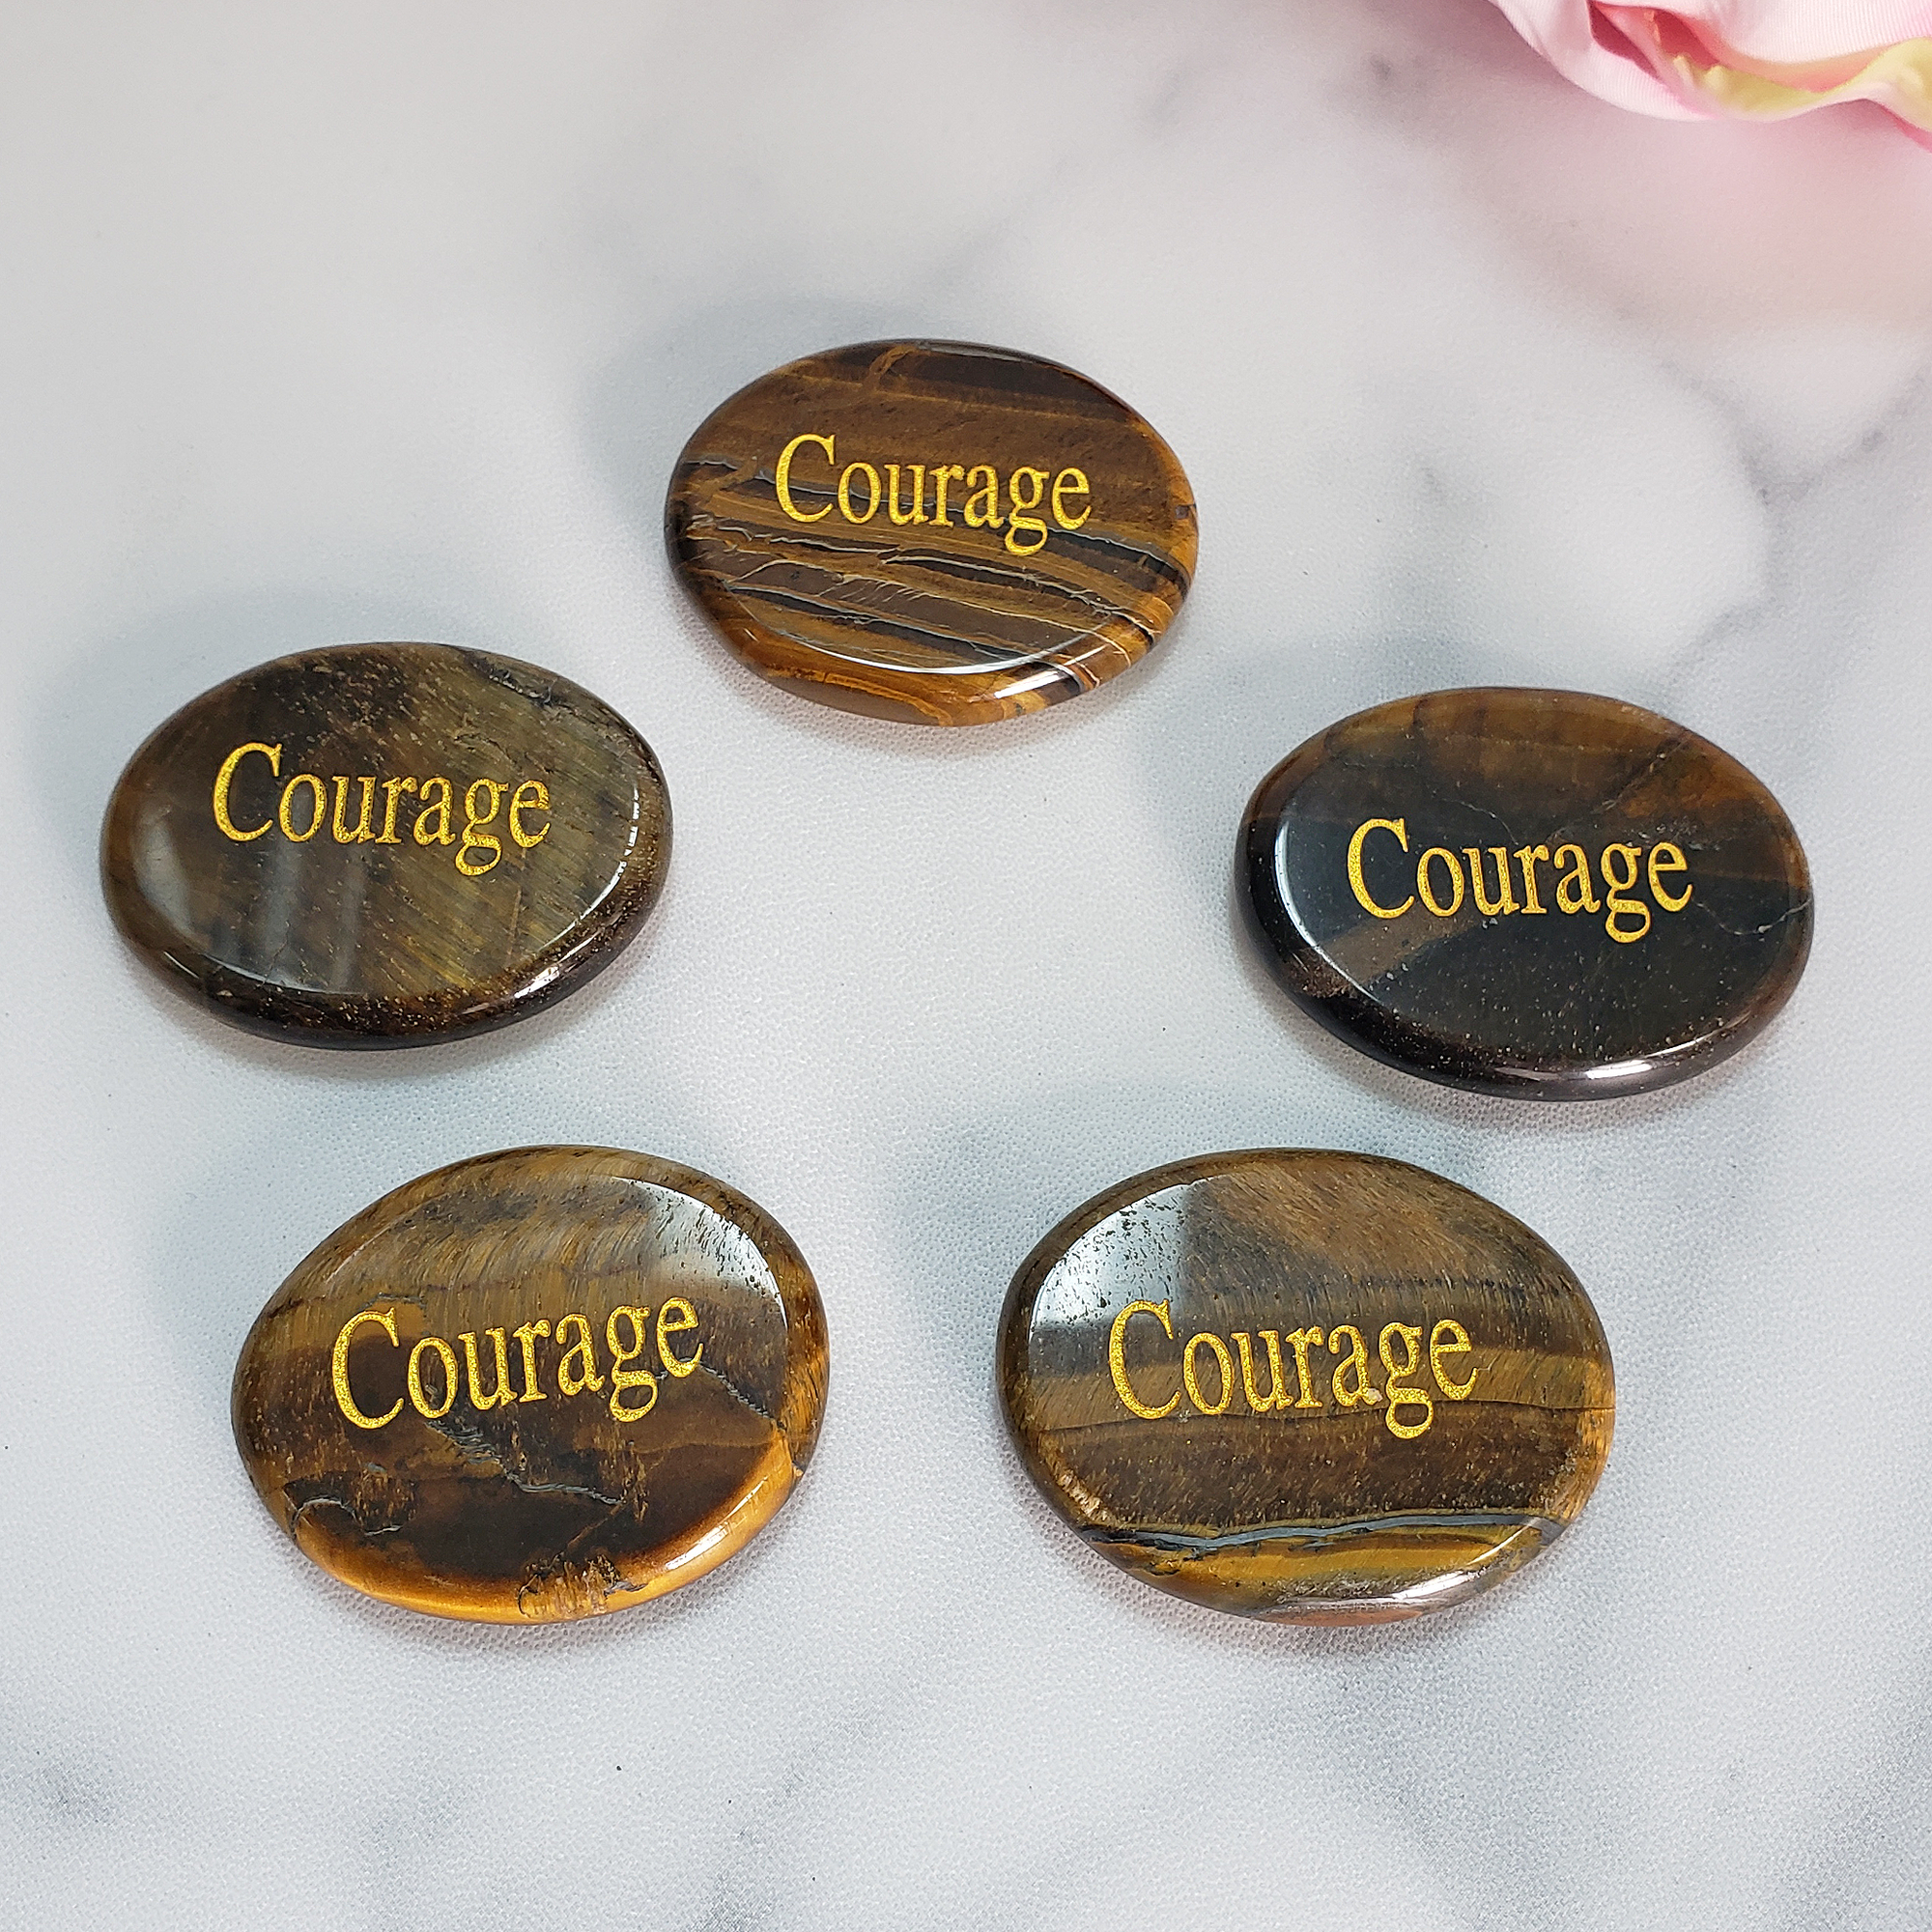 Tigers Eye Courage Affirmation Palm Stone | Natural Crystal Worry Stone with "Courage" Engraving